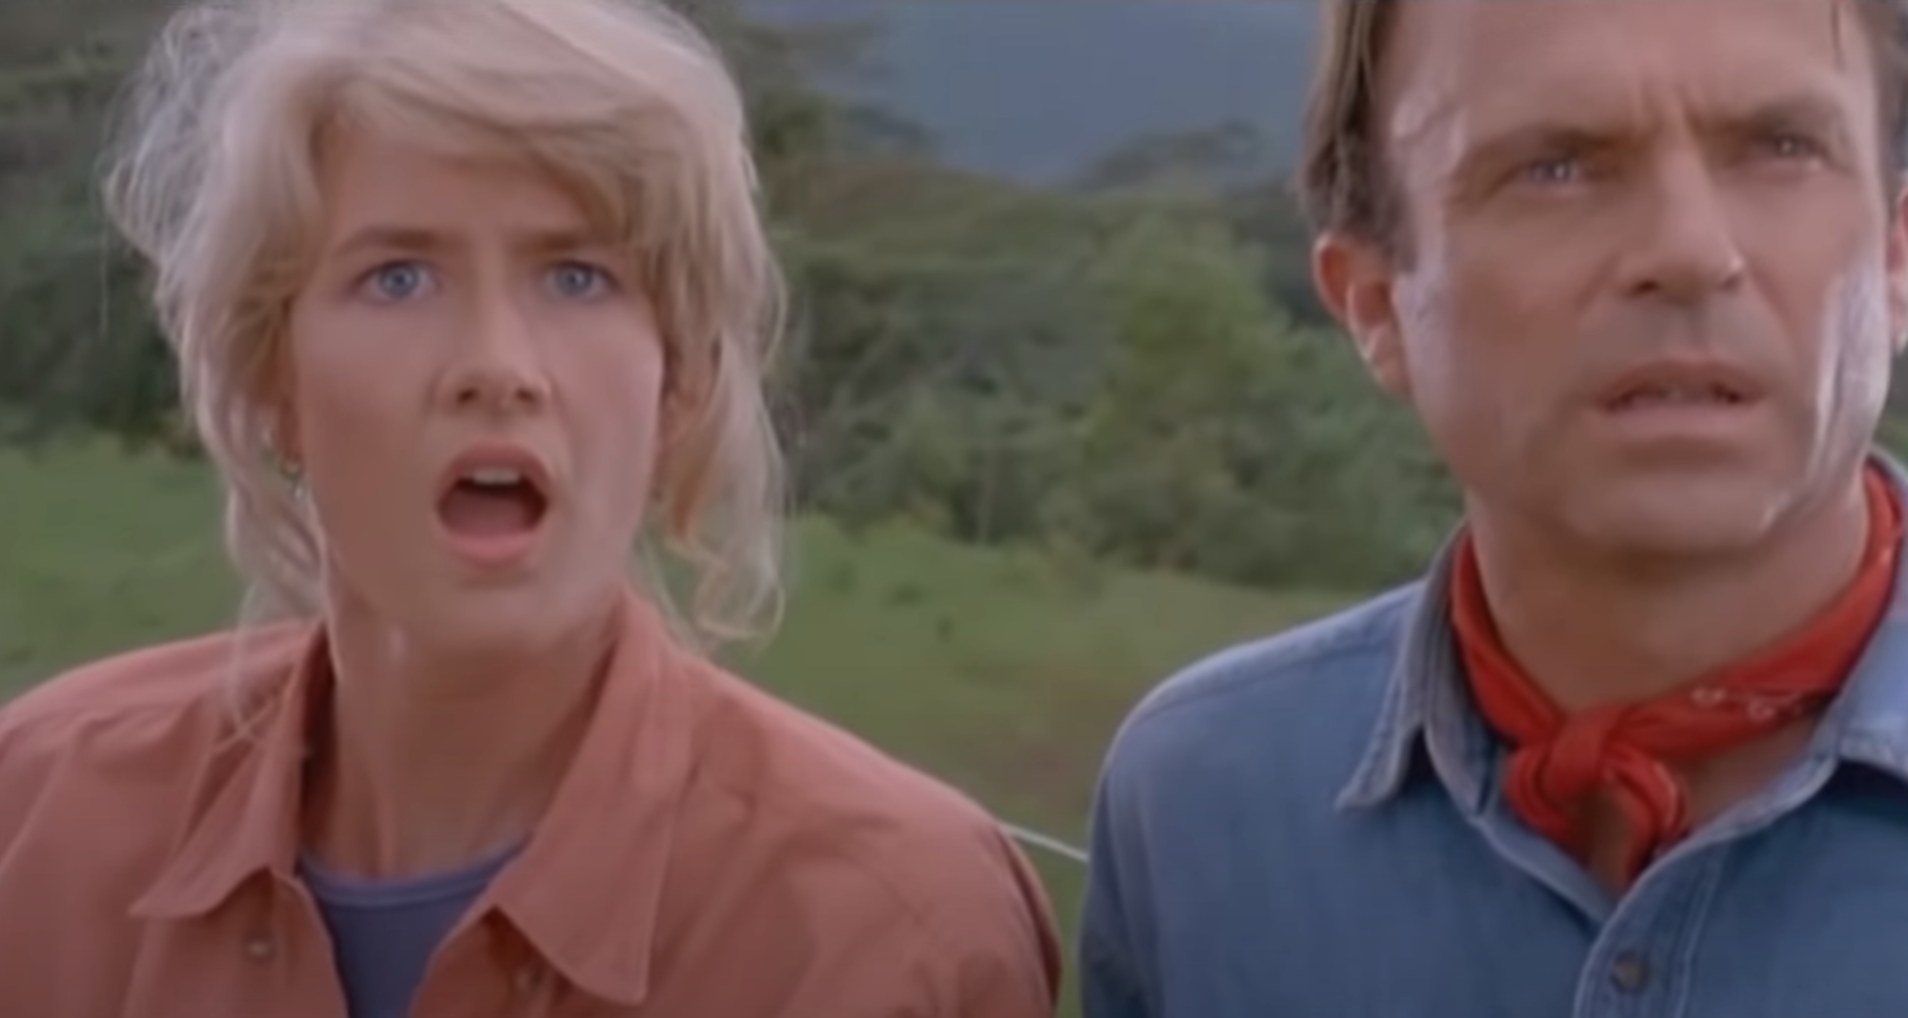 Ellie and Grant appear dumbstruck in Jurassic Park